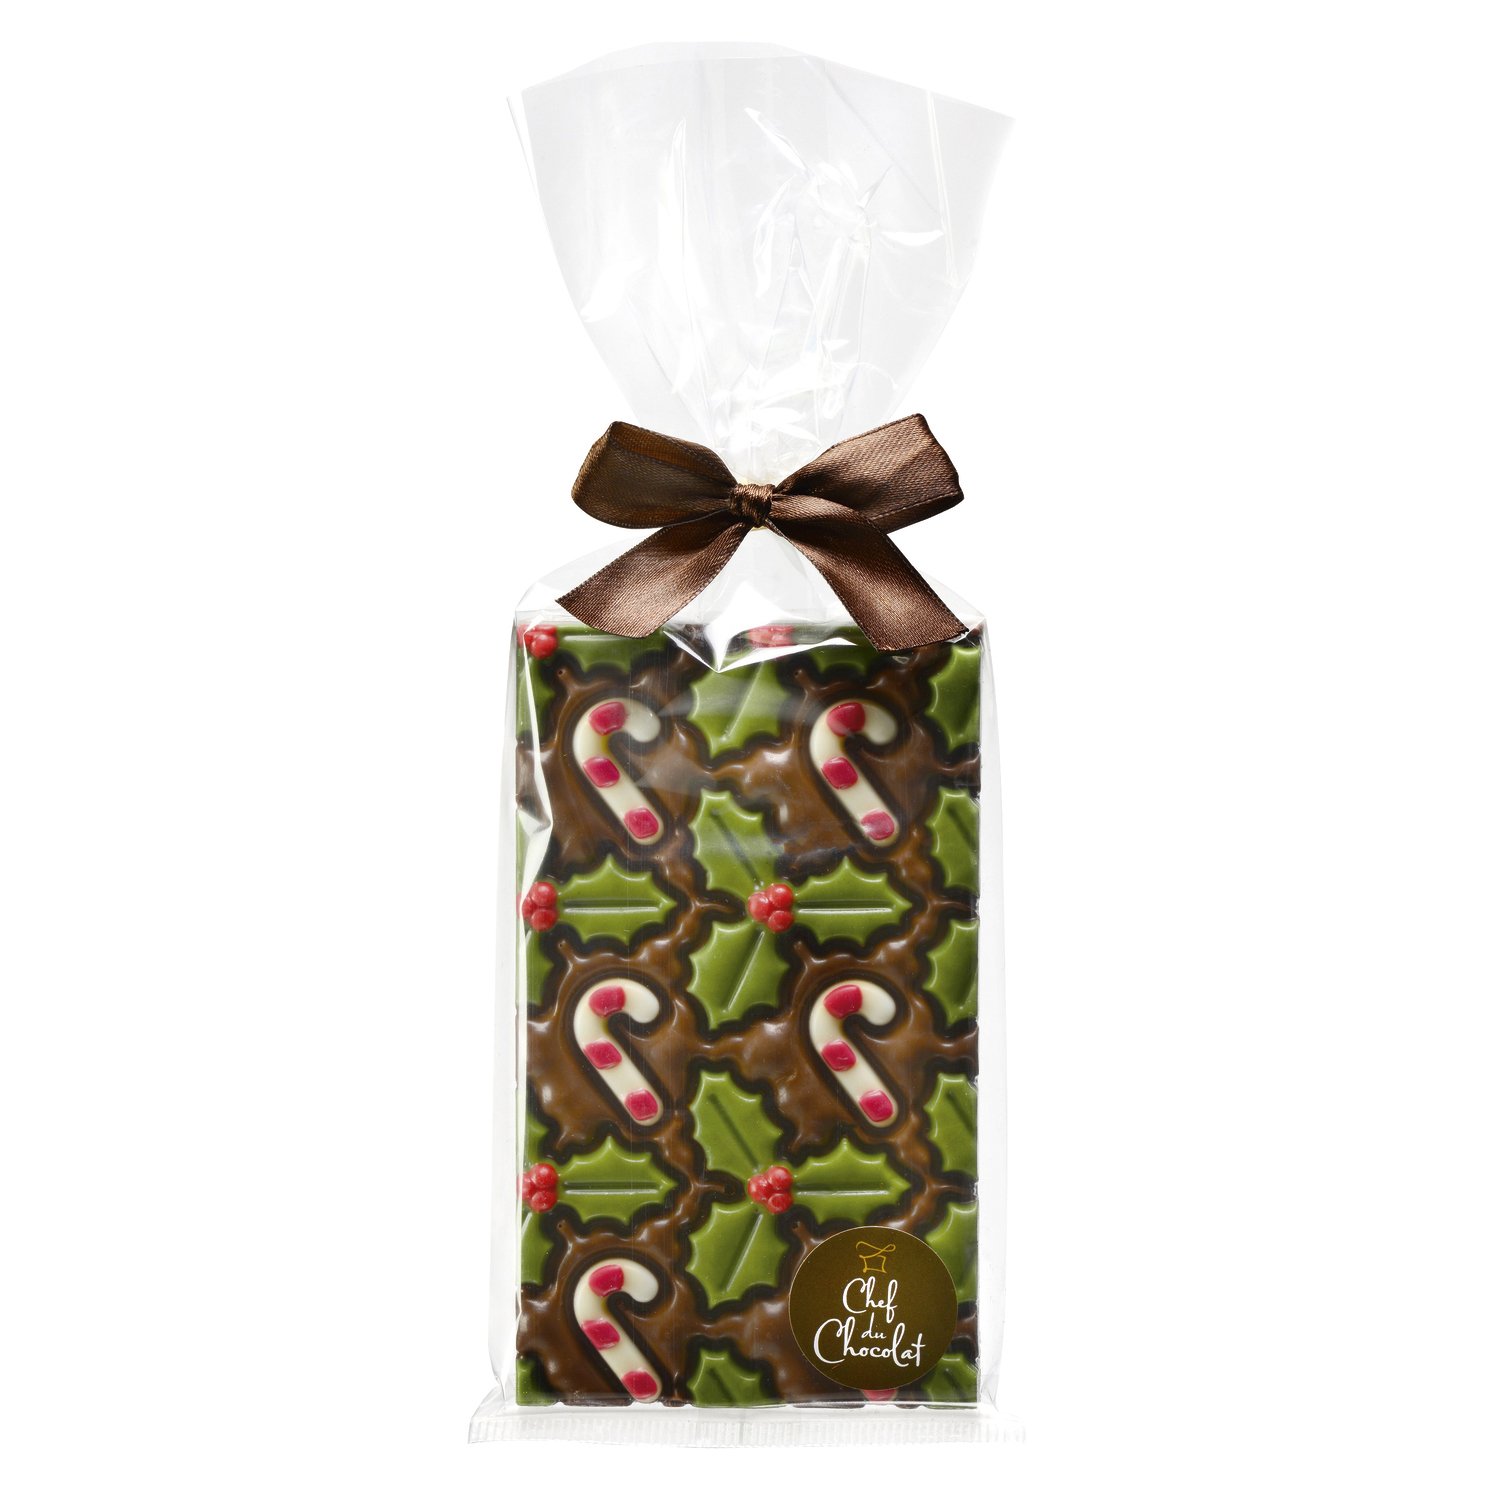 Decorated milk chocolate bar with candy canes design in cello bag - 8x150g